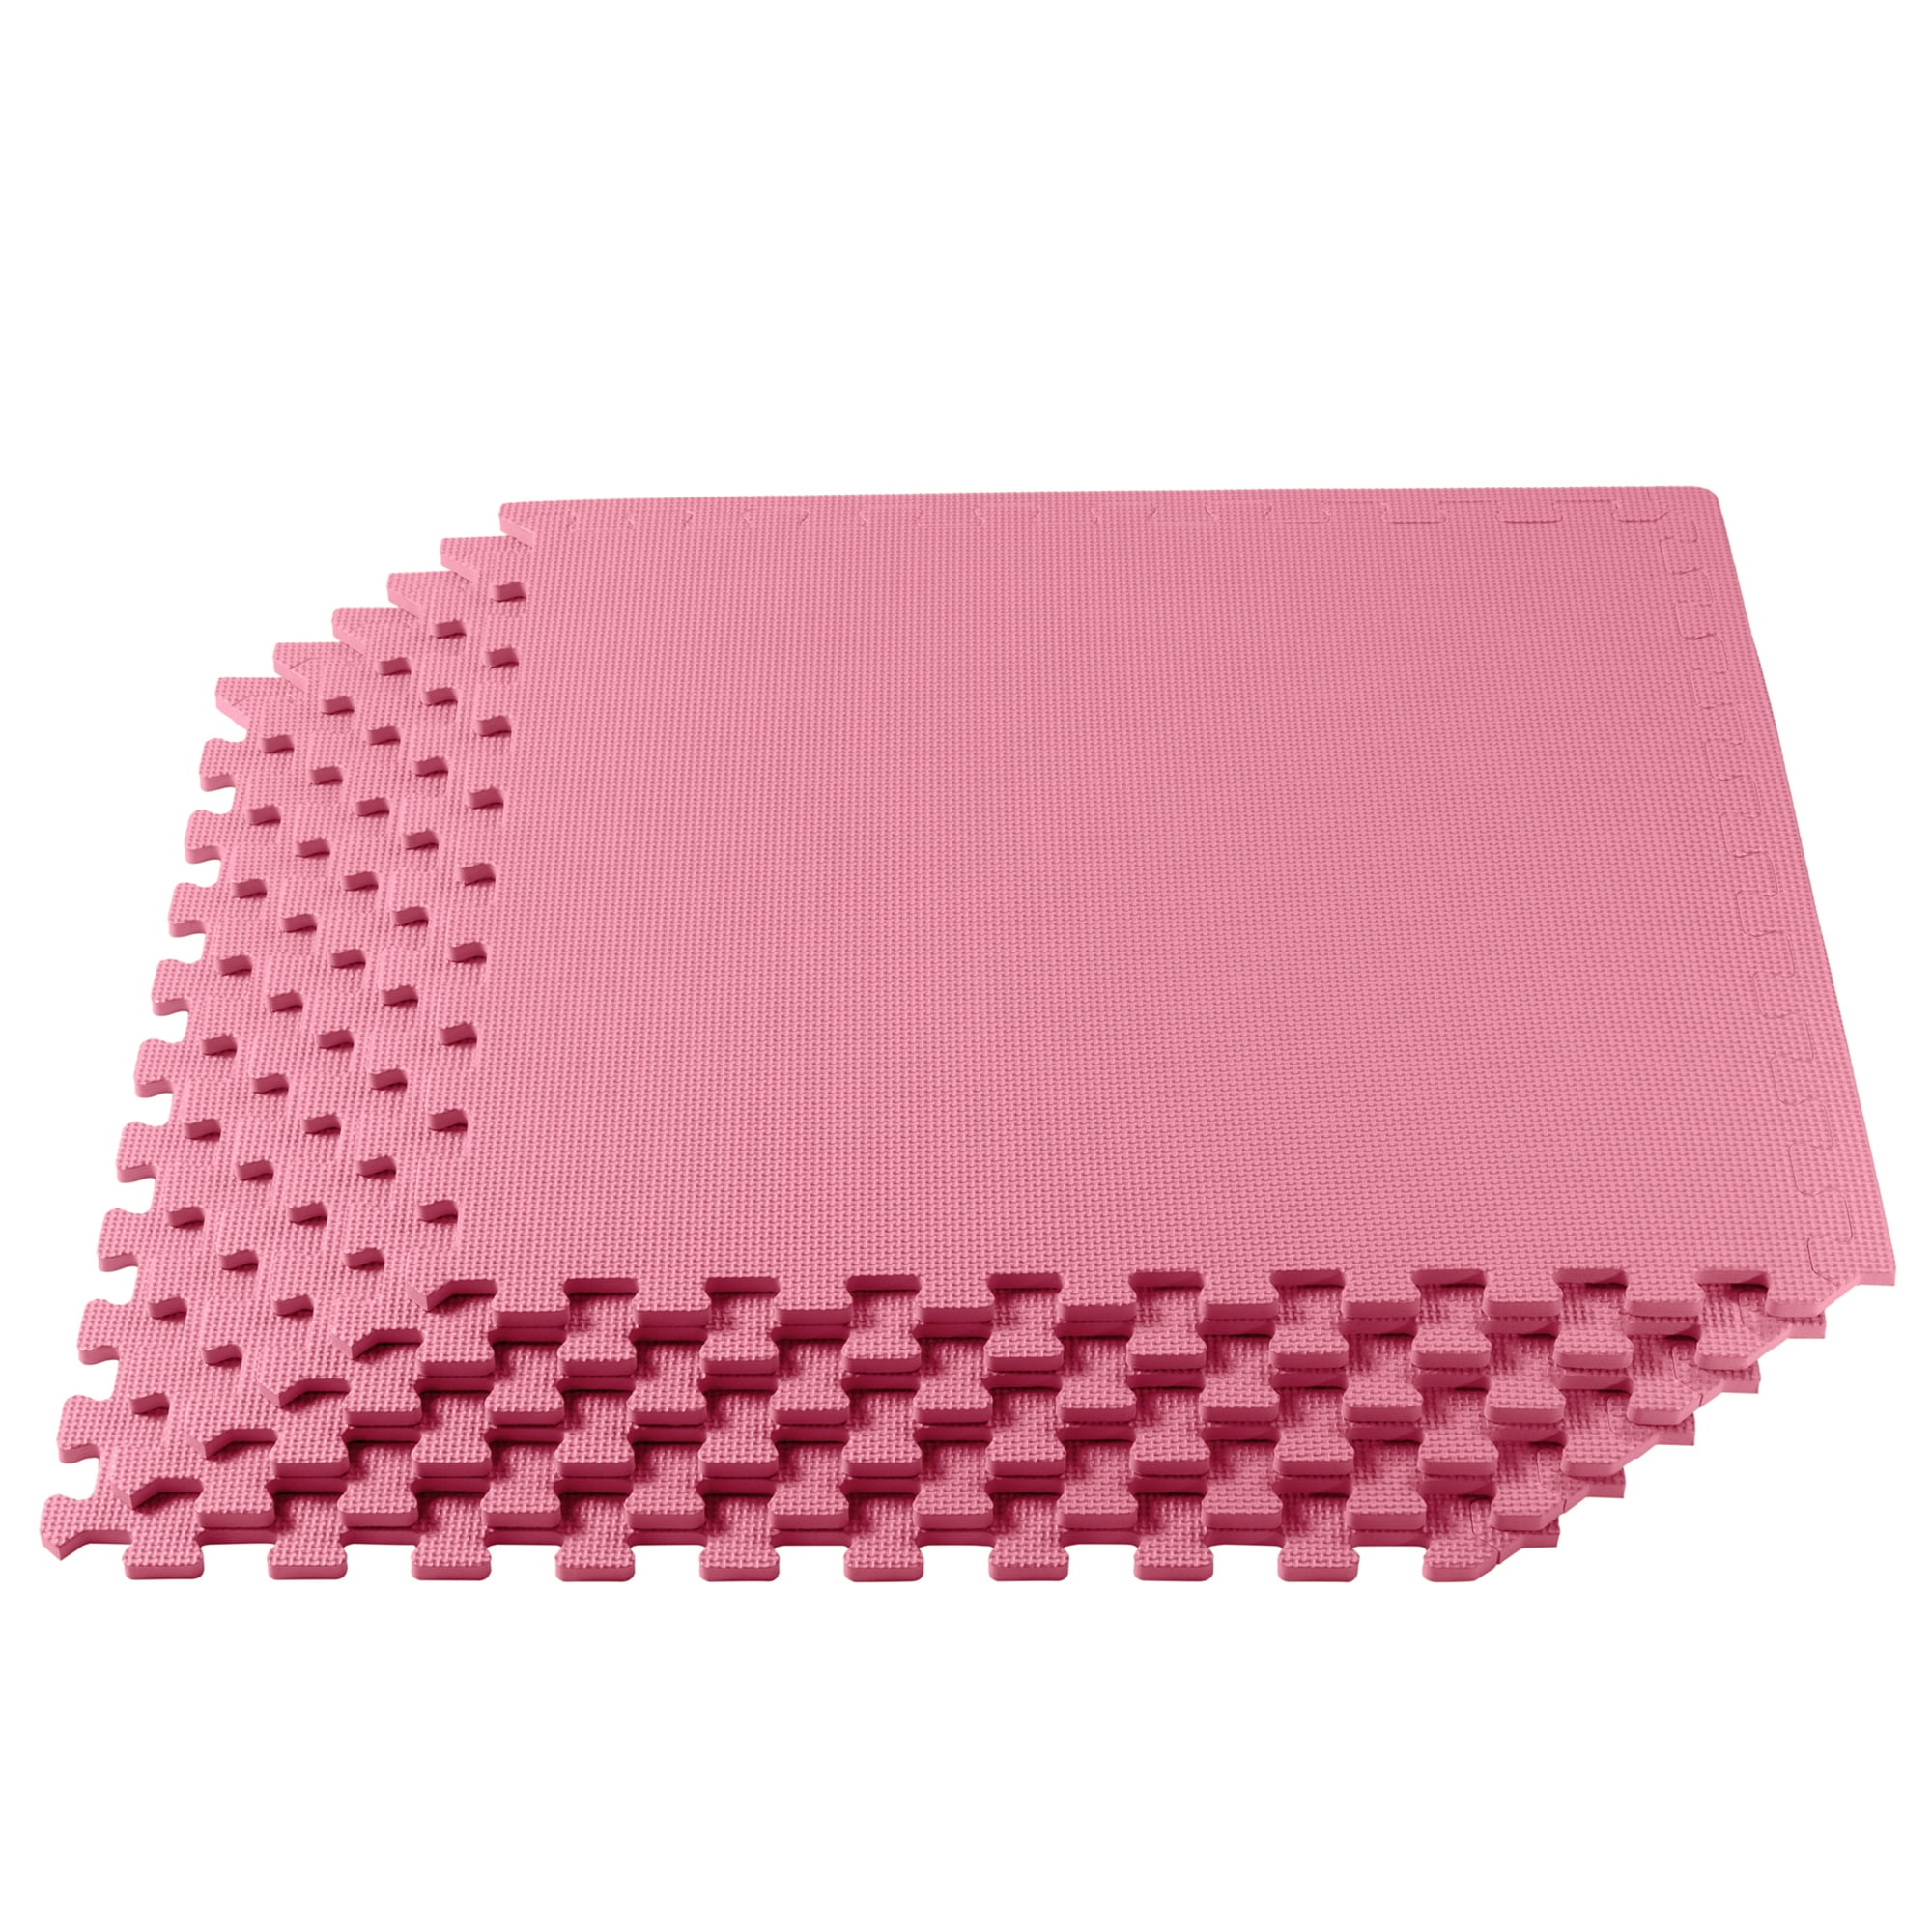 24 square feet classroom gym 24 inch red puzzle mats eva foam top safety rated 